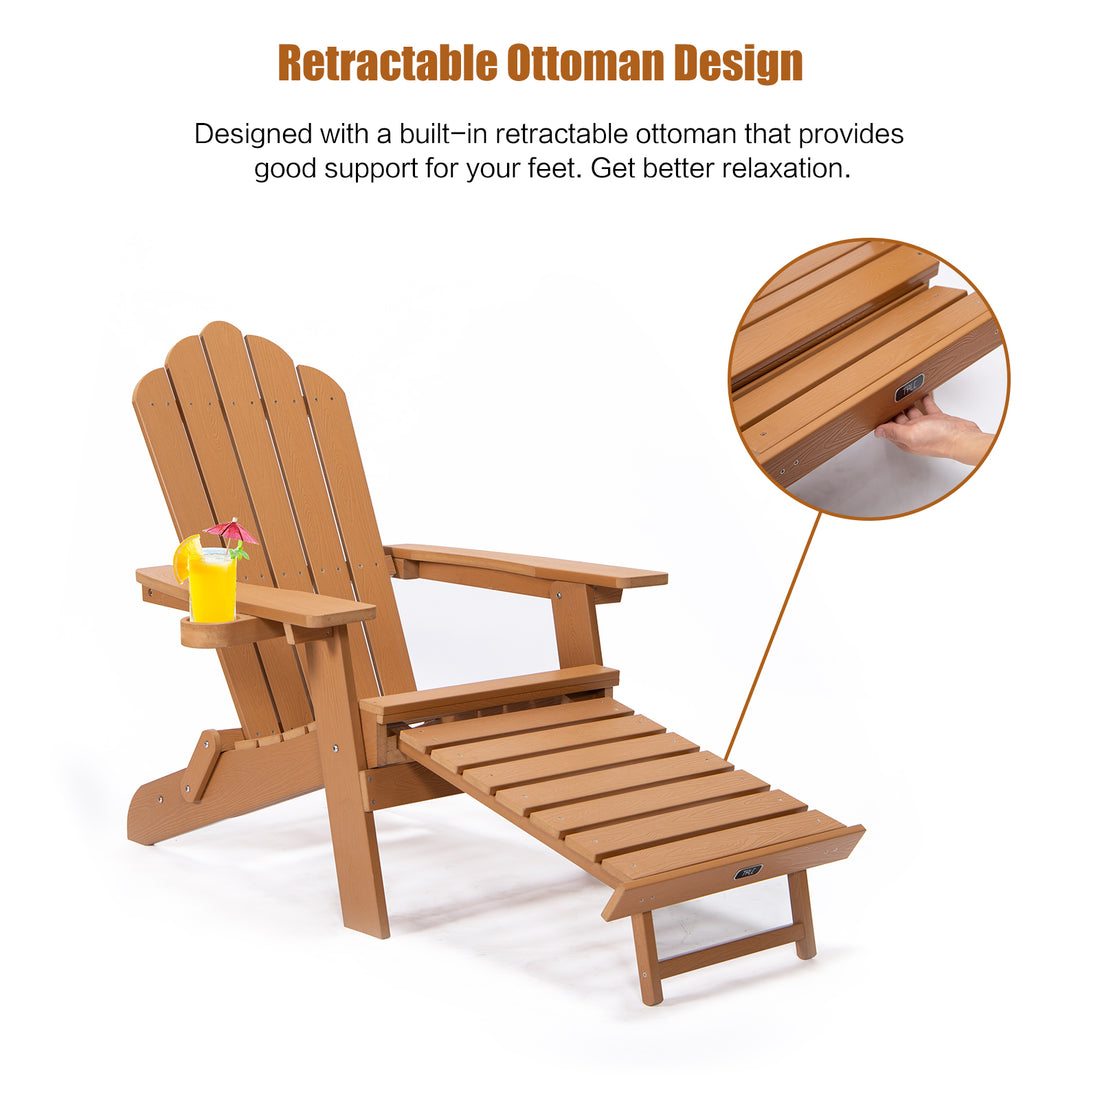 NEW TALE Folding Adirondack Chair With Pullout Ottoman With Cup Holder, Oversized, Poly Lumber,  For Patio Deck Garden, Backyard Furniture, Easy To Install,.Banned From Selling On Amazon